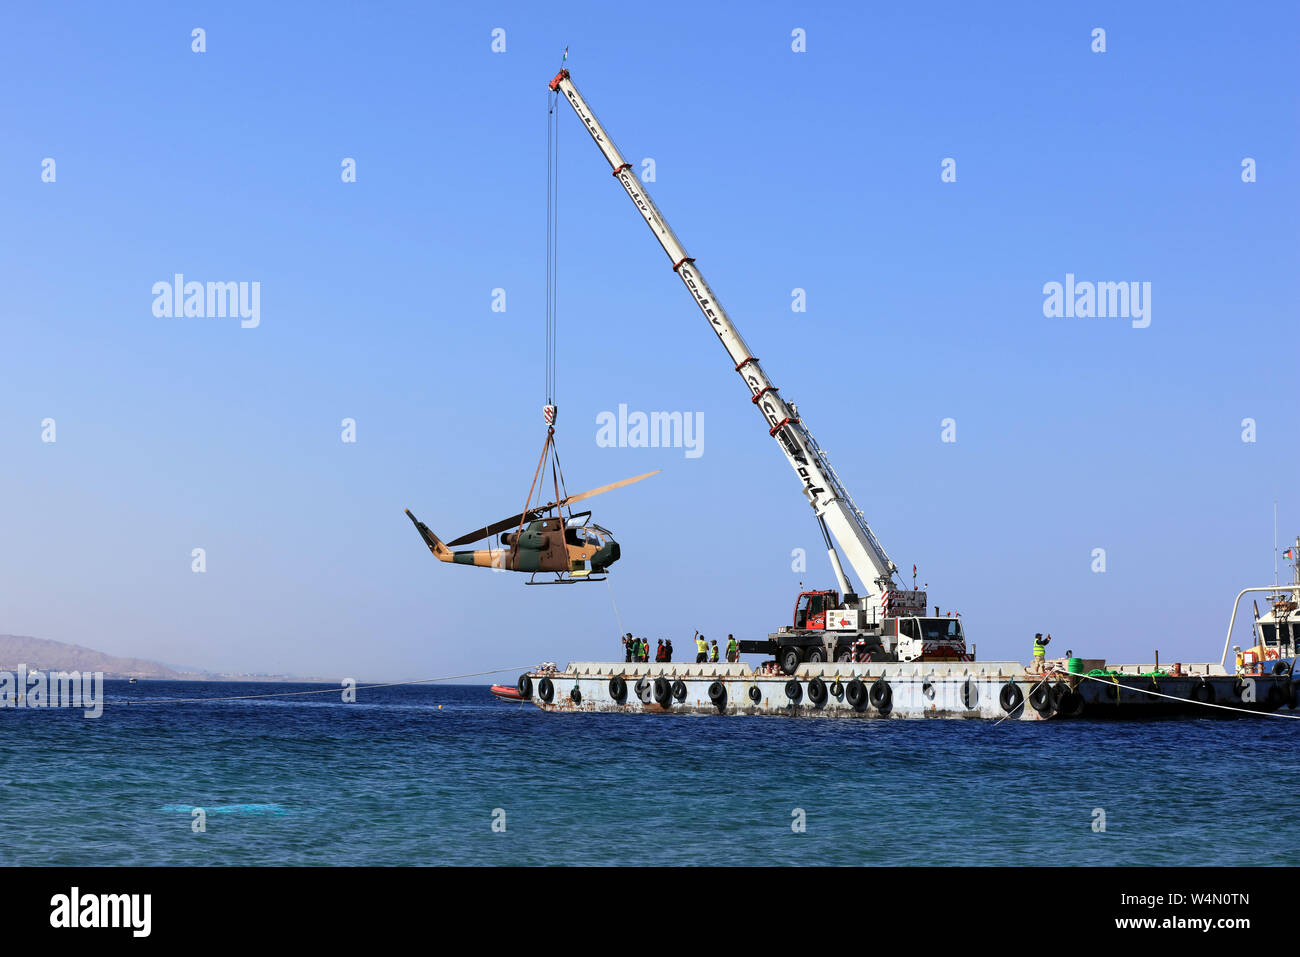 (190724) -- AMMAN, July 24, 2019 (Xinhua) -- A body of a military helicopter, donated by the Jordanian Royal Air Force, is submerged in the Red Sea off Aqaba, as part of a new underwater military museum, in south Jordan, July 24, 2019. The museum is built by Aqaba Special Economic Zone to attract more tourists in summer, (Photo by Mohammad Abu Ghosh/Xinhua) Stock Photo